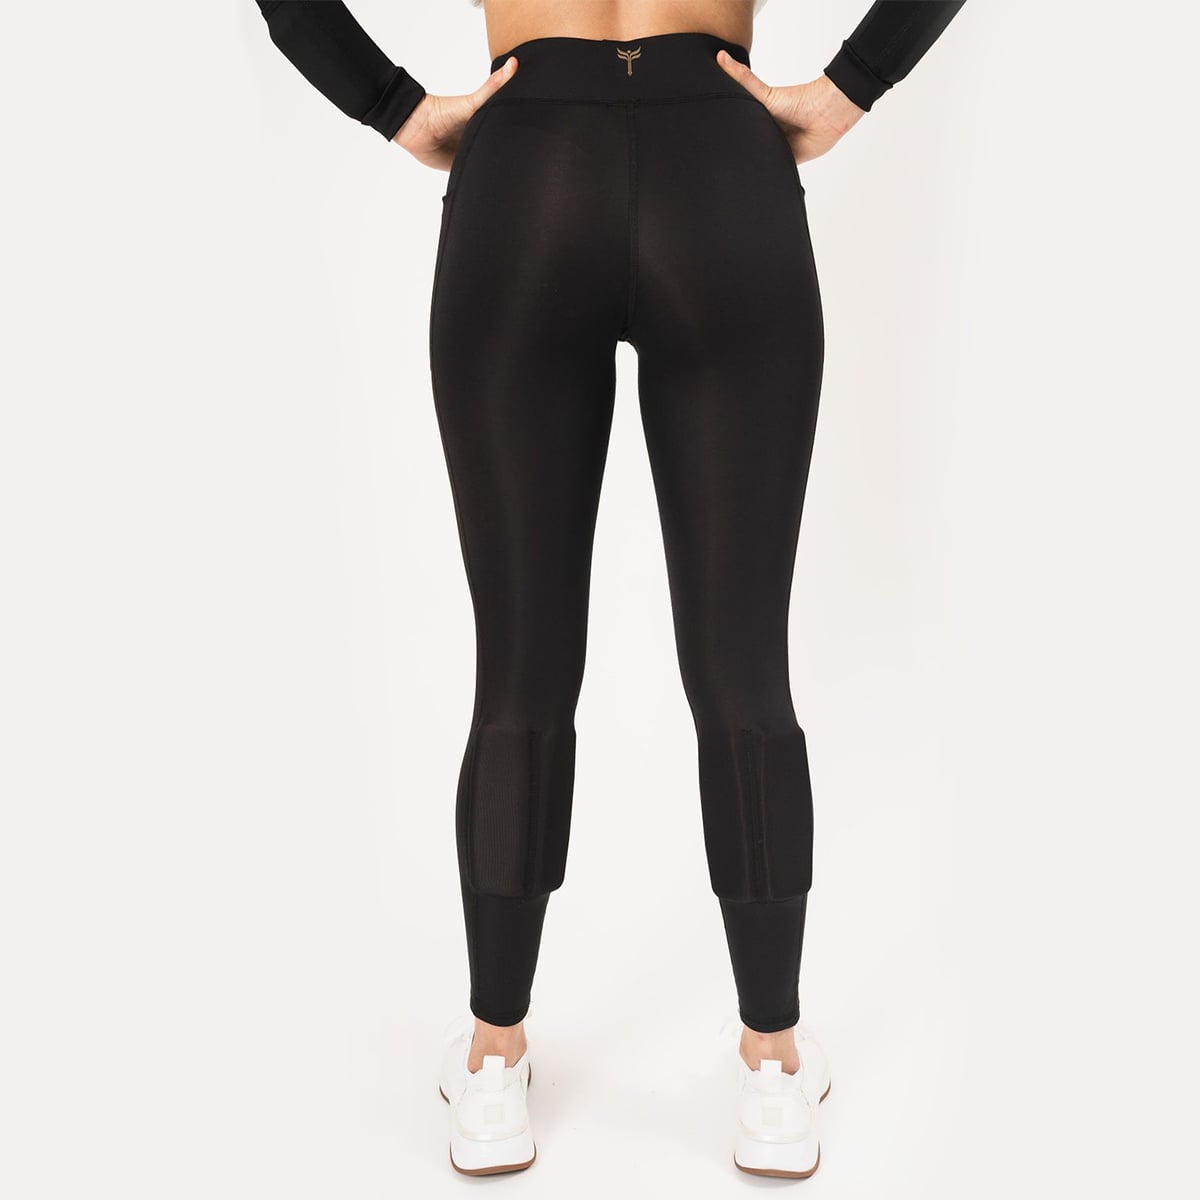 Women's Booty Lift Weighted Legging